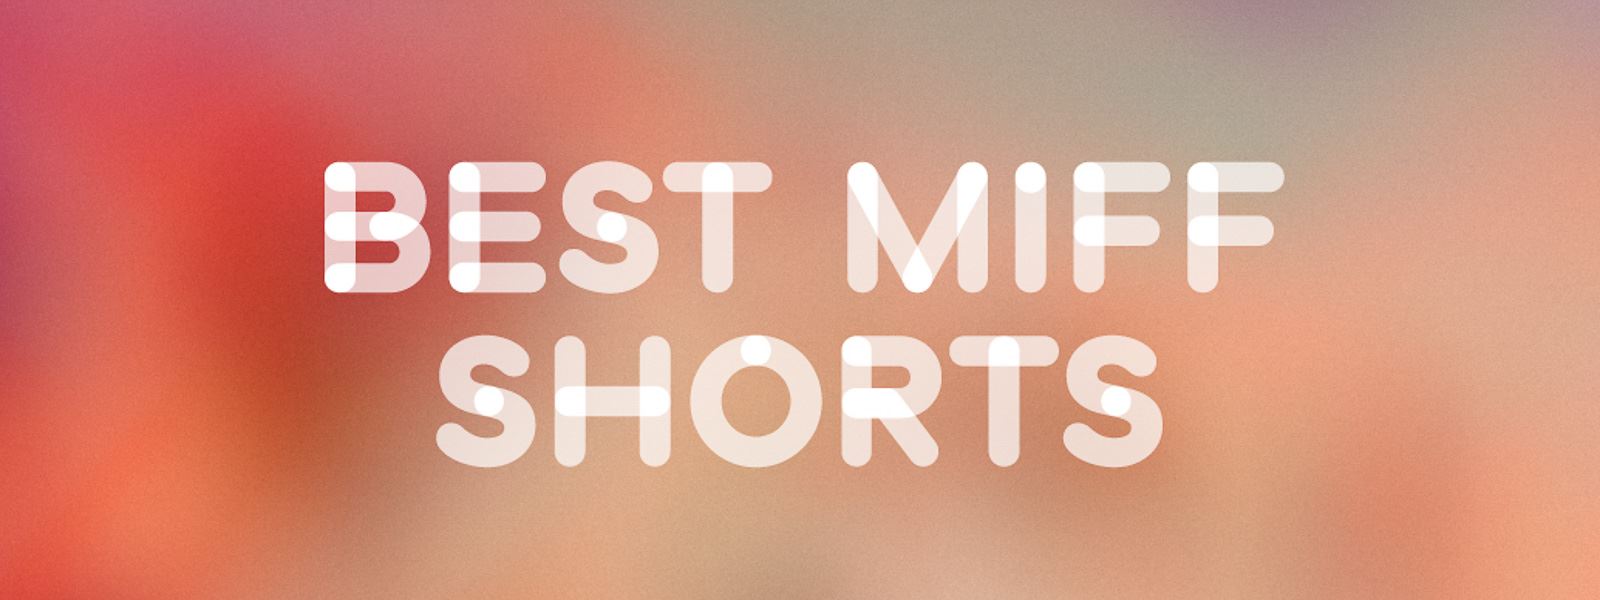 Image from 'Best MIFF Shorts'